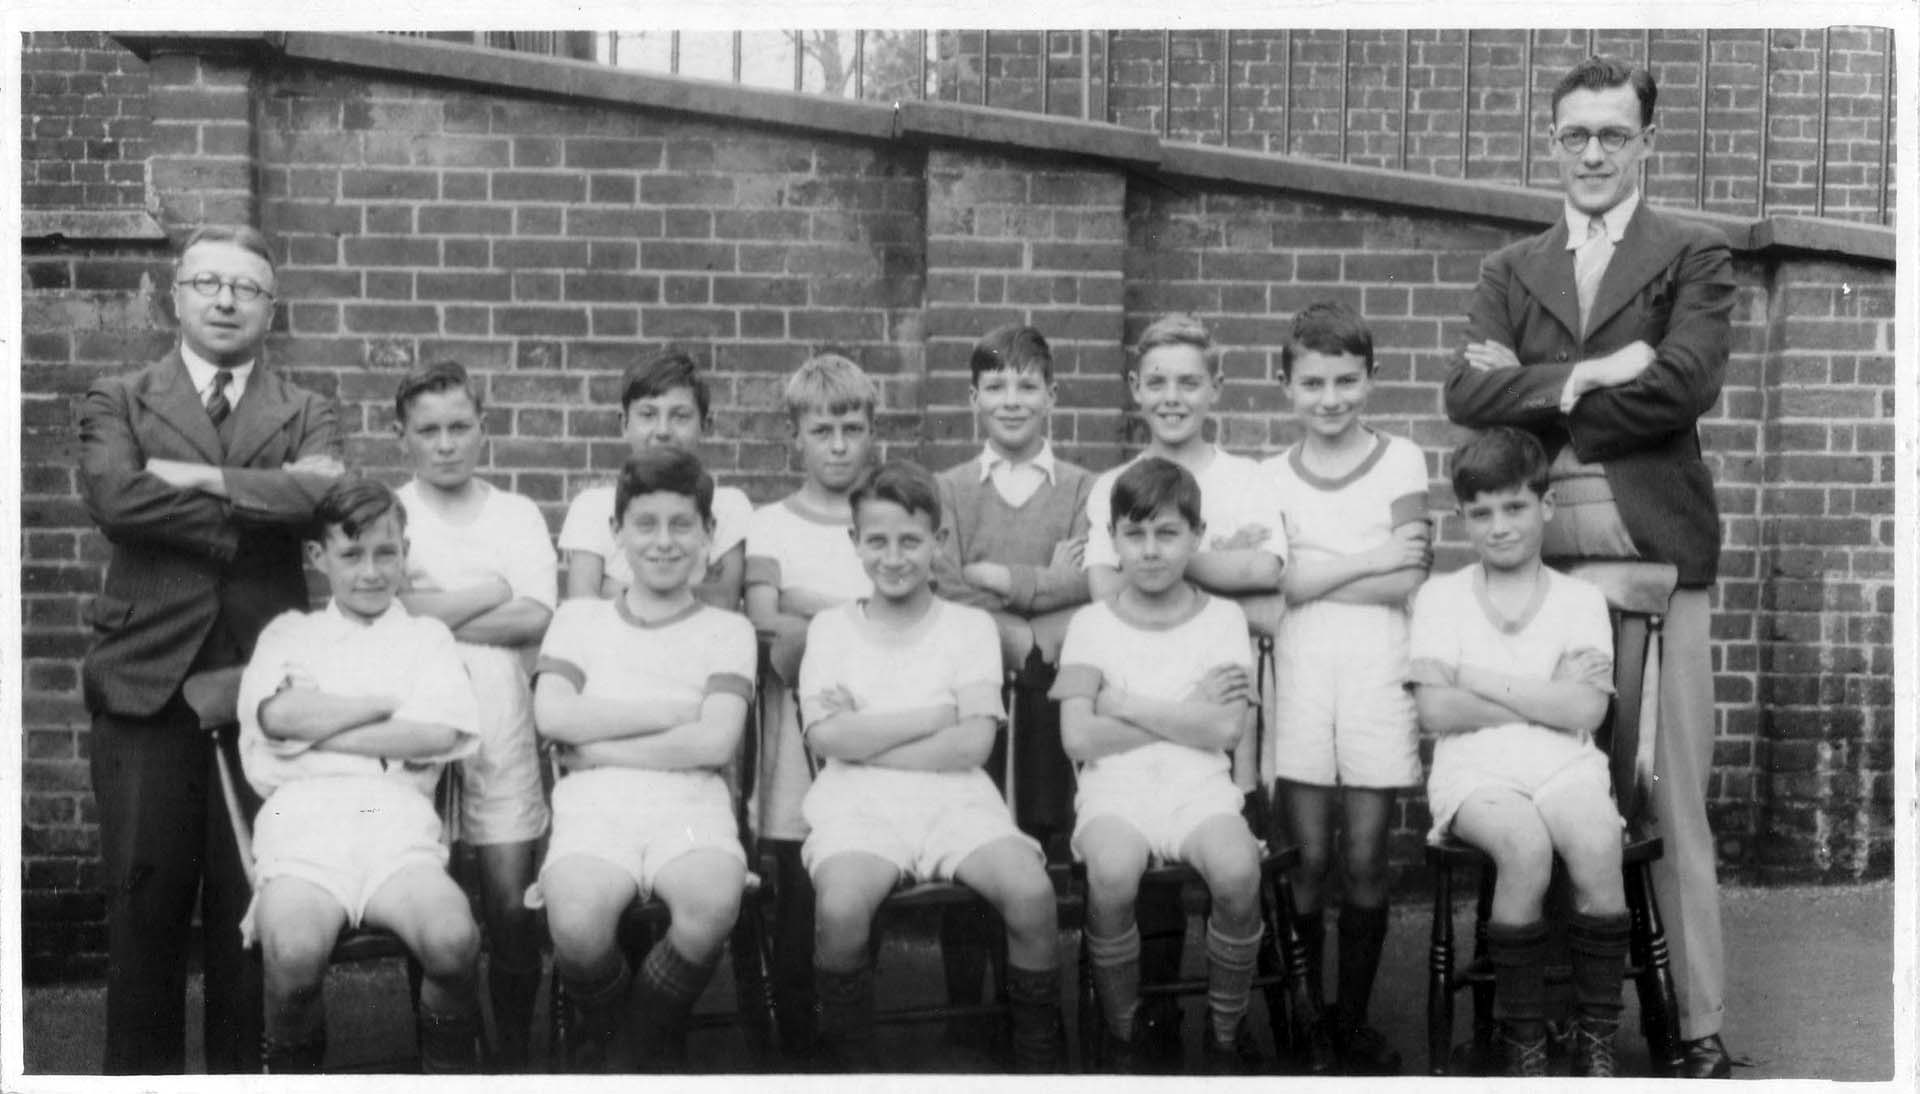 Black and white photo of 11 children seated in white tops and shorts with 2 teachers standing either side